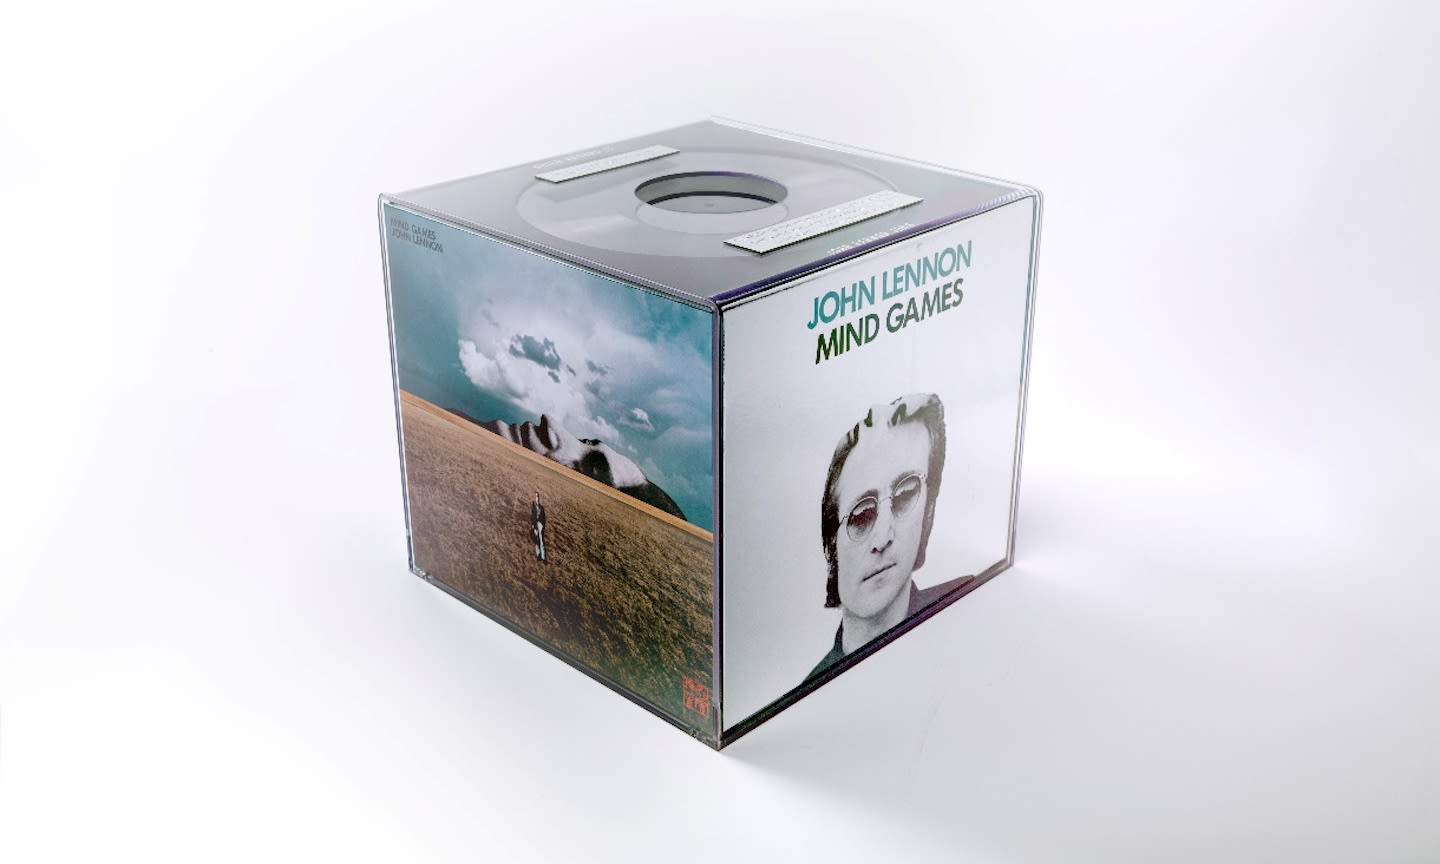 John Lennon’s ‘Mind Games’ To Receive New ‘Ultimate Collection’ Release